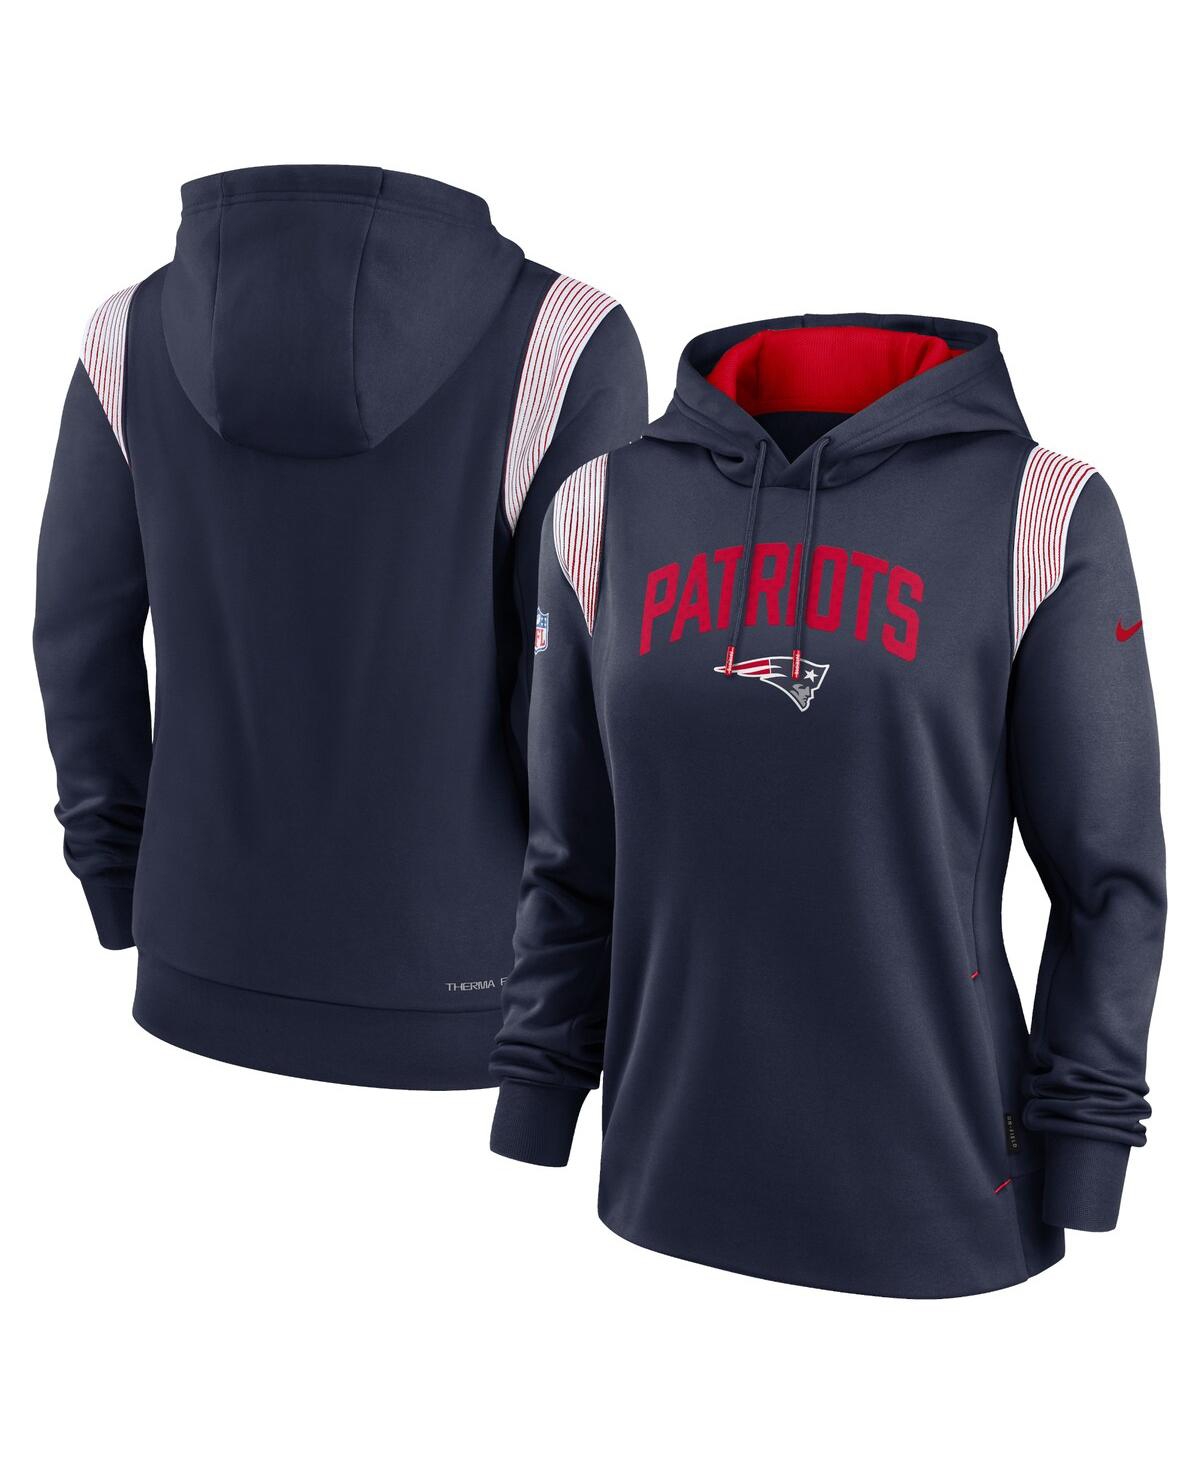 NIKE WOMEN'S NIKE NAVY NEW ENGLAND PATRIOTS SIDELINE STACK PERFORMANCE PULLOVER HOODIE